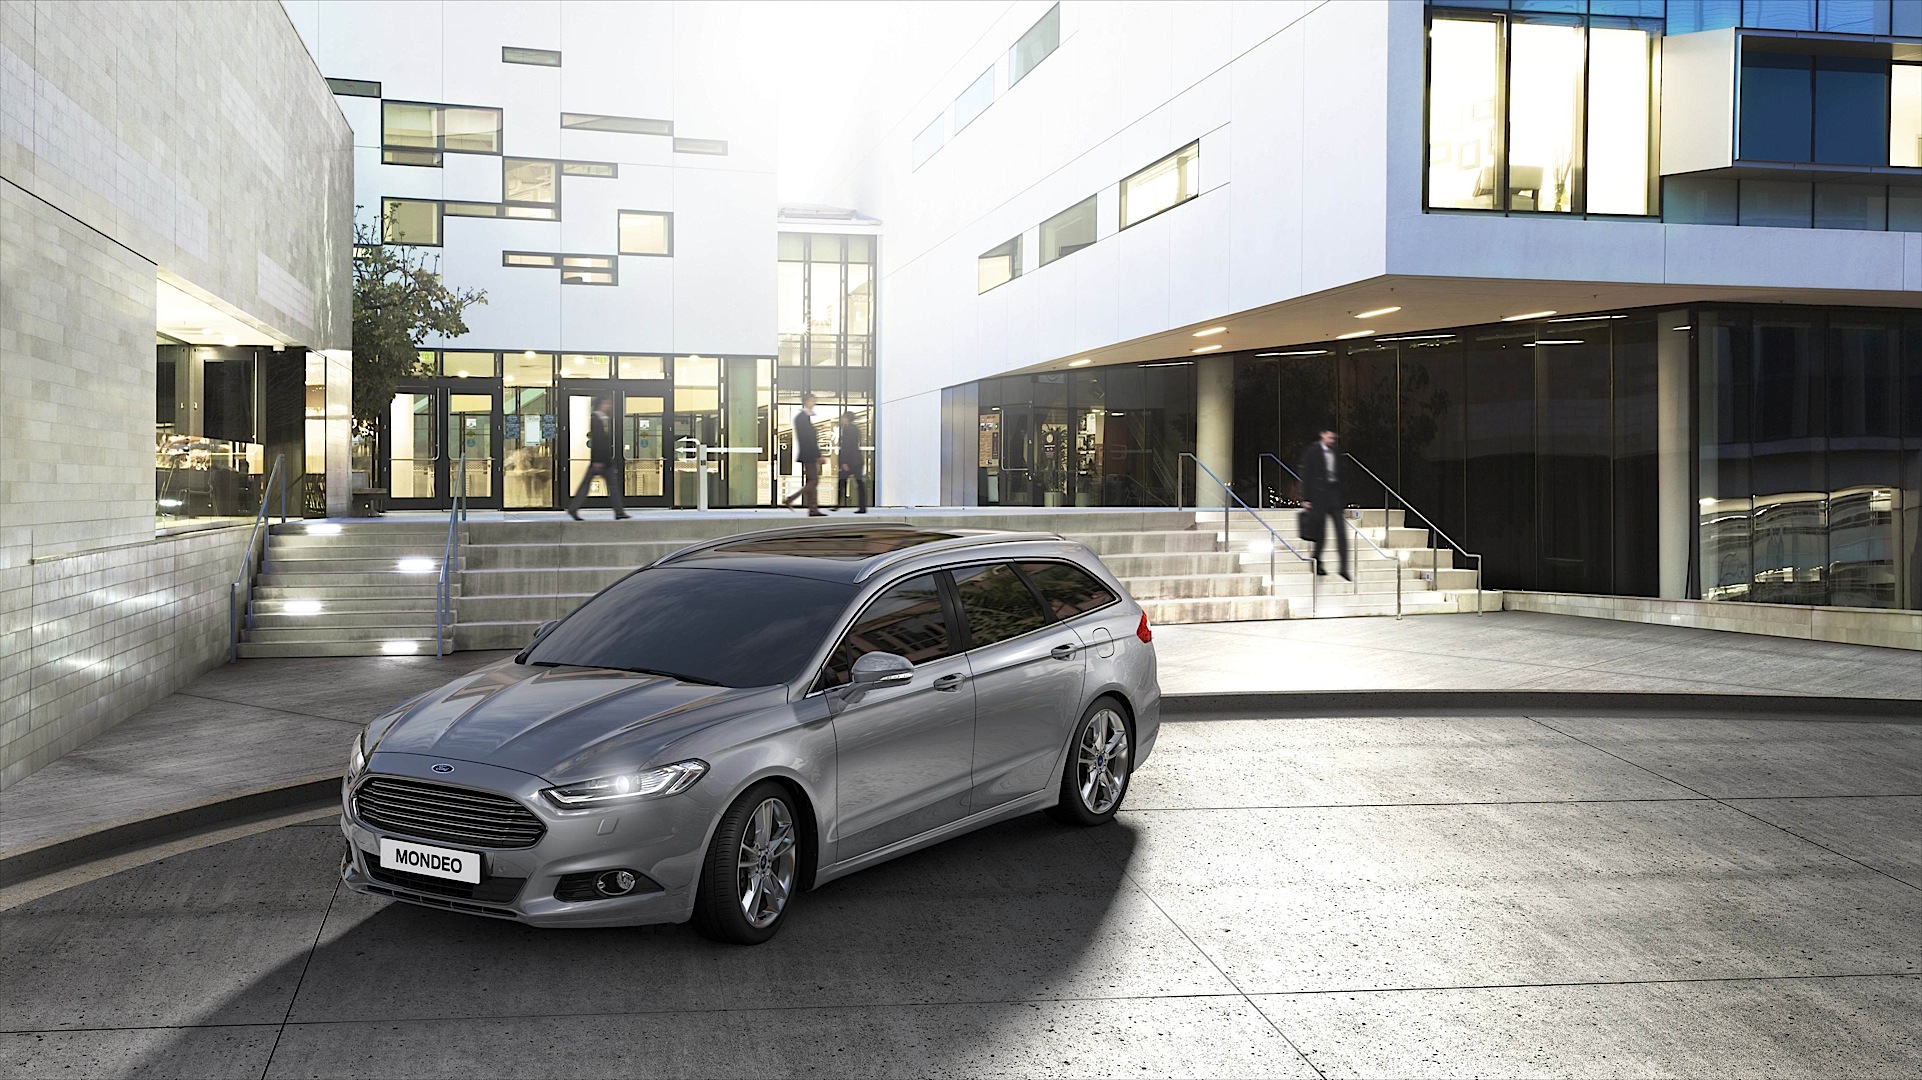 2015-ford-mondeo-is-laden-with-goodies-photo-gallery_6